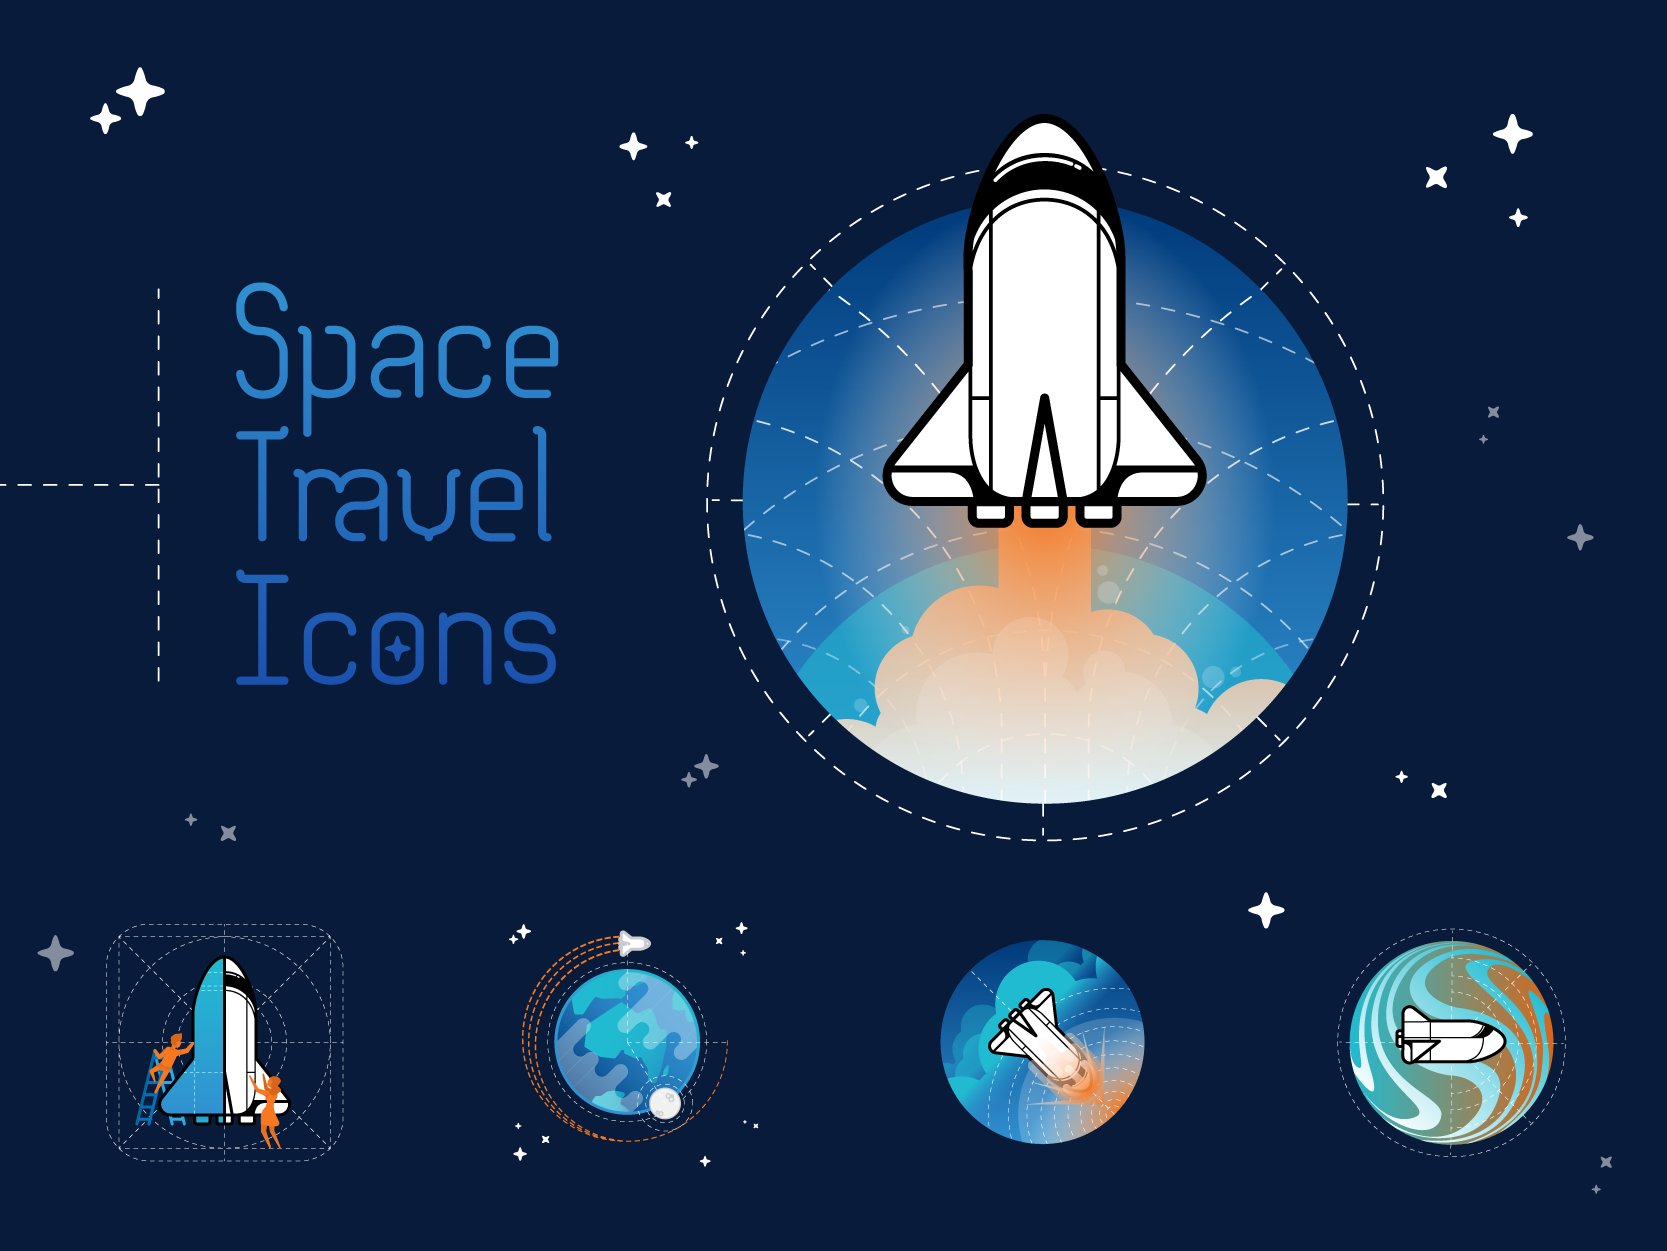 Space Travel Icons cover image.